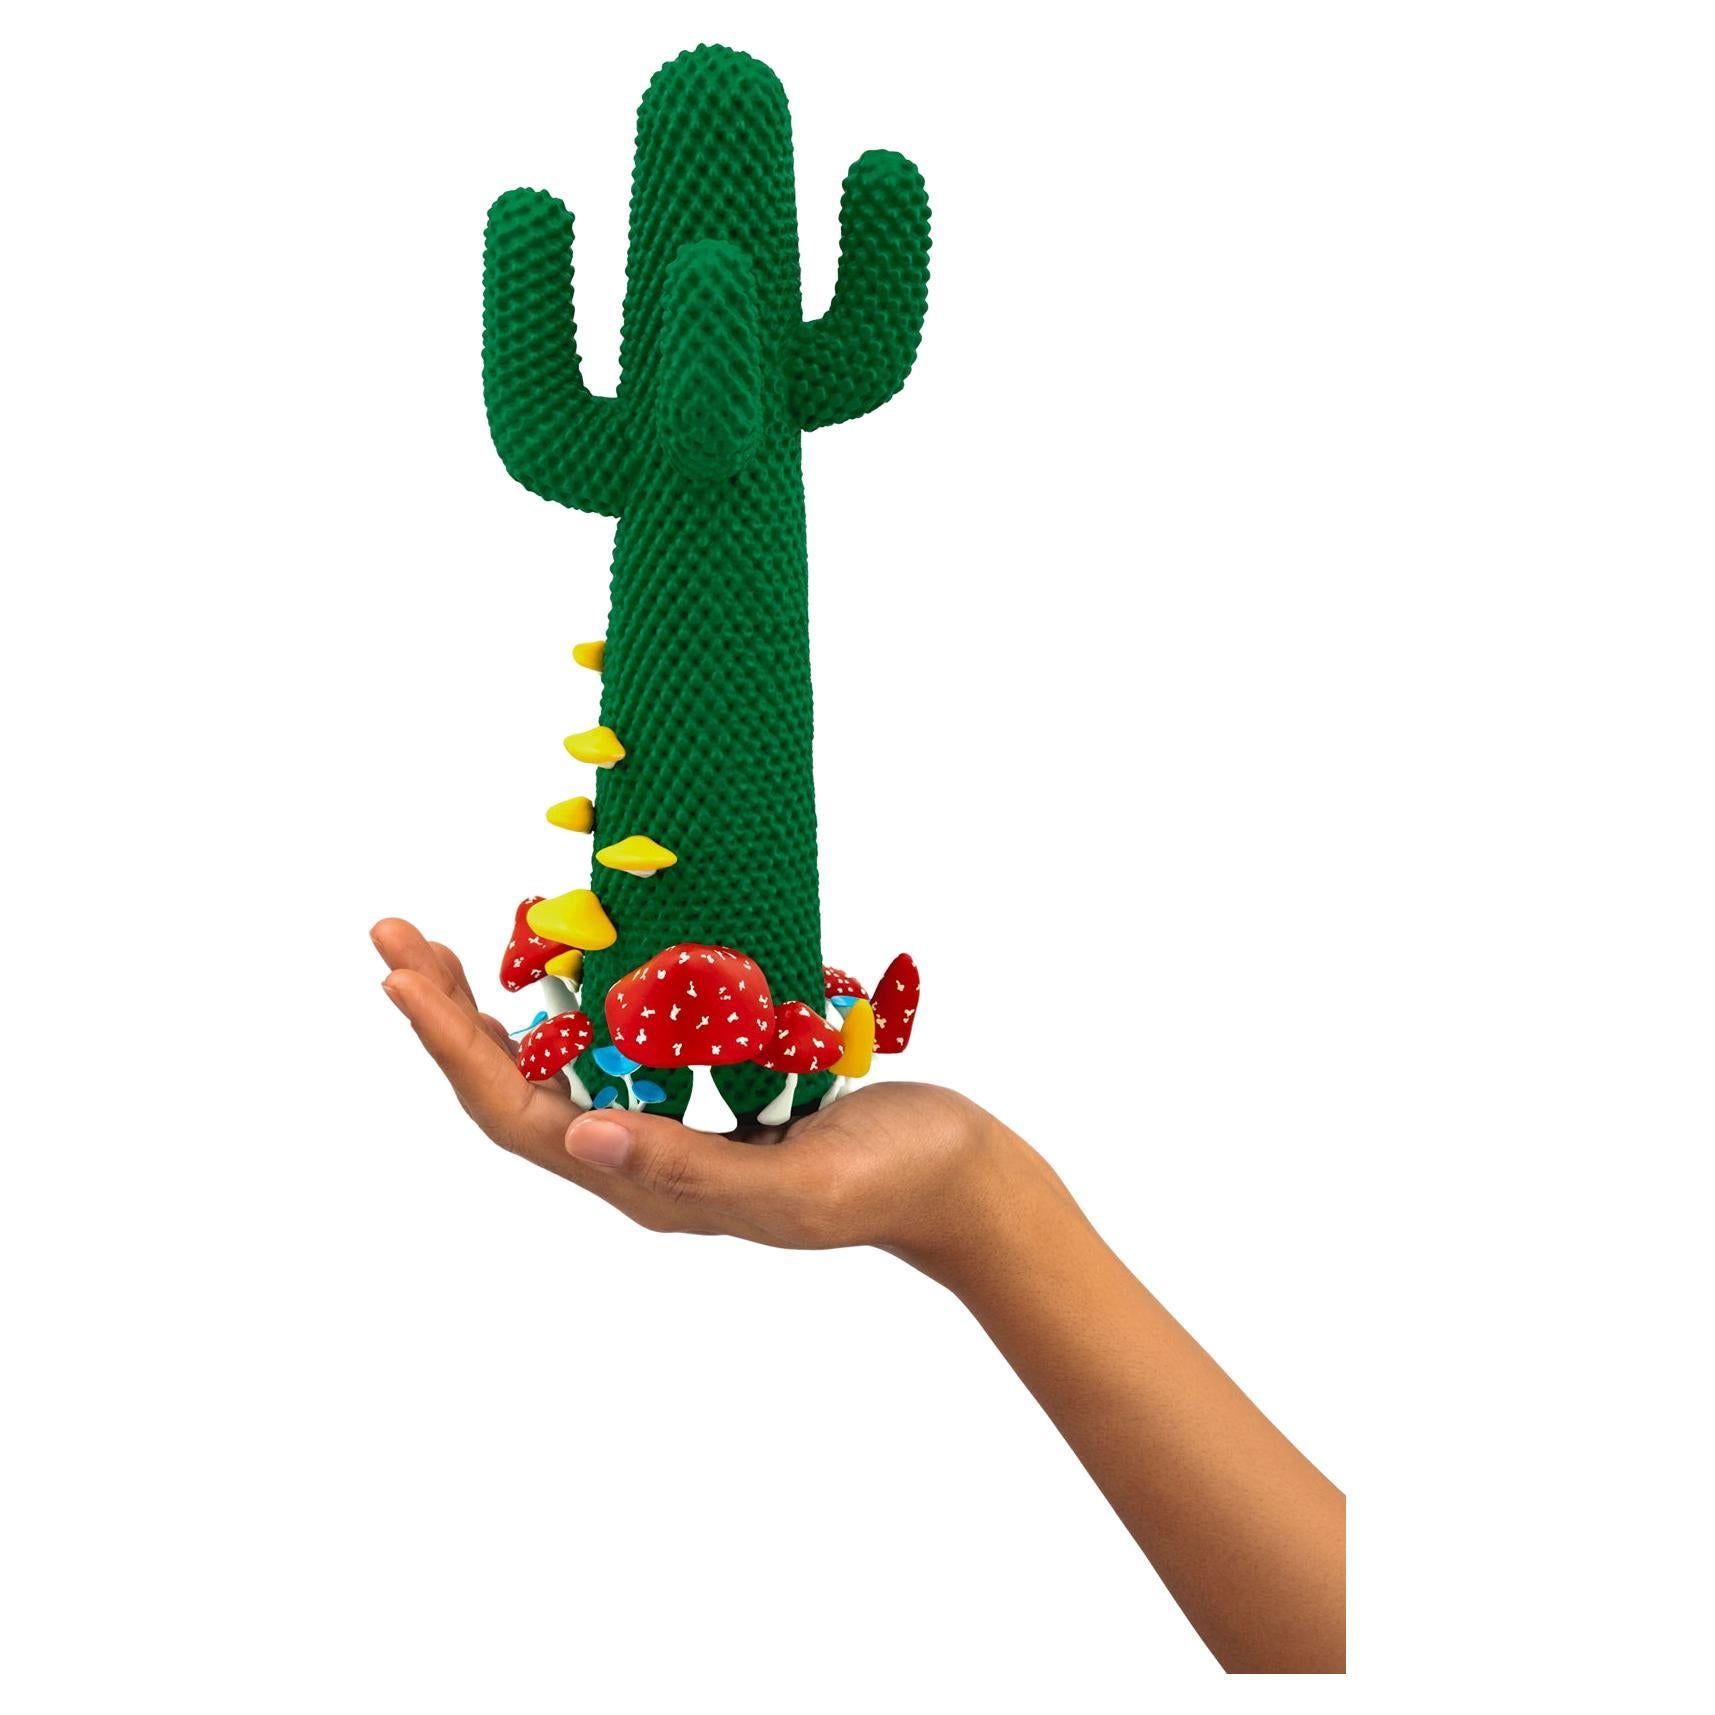 Limited Edition #69/99

Gufram presents the miniaturised version of the Shroom CACTUS® created in collaboration with A$AP Rocky and the artist’s new design studio HOMMEMADE Exactly as the real-size Shroom CACTUS®, the new Guframini piece features